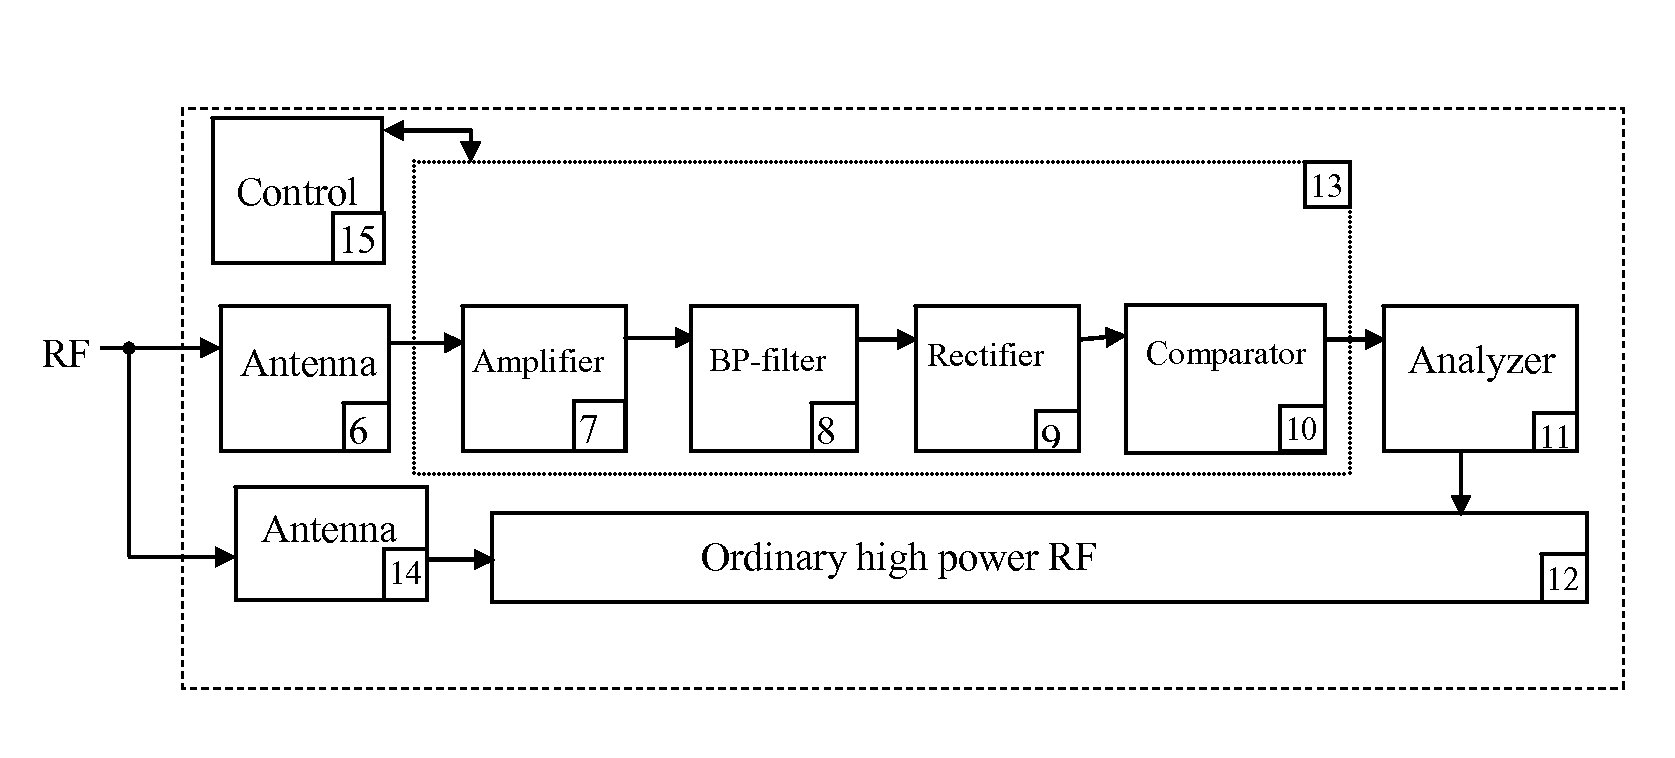 Implantable RF telemetry devices with power saving mode